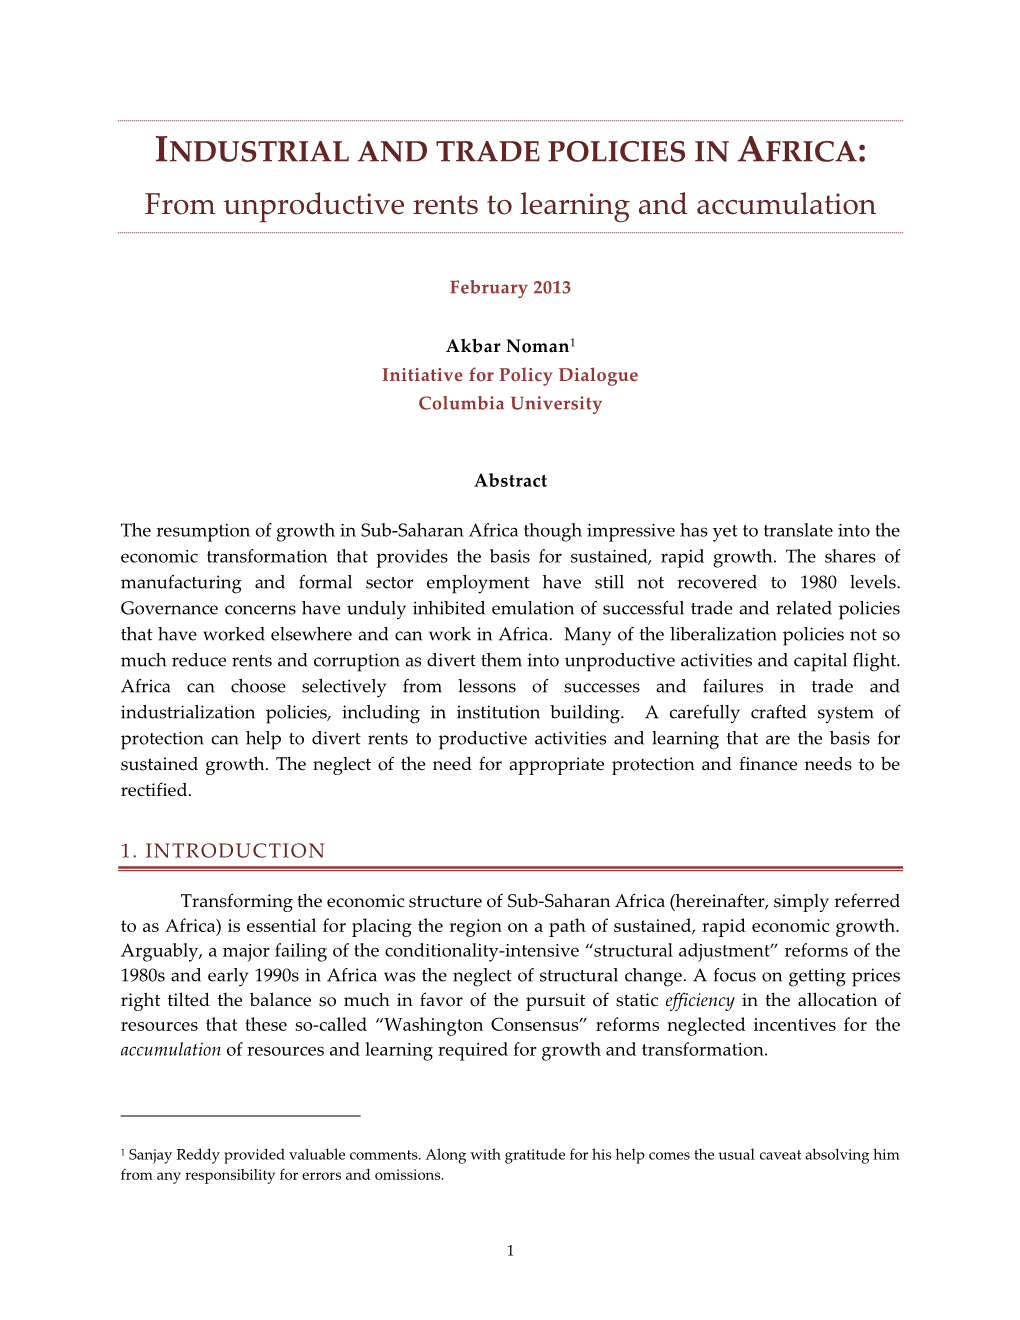 INDUSTRIAL and TRADE POLICIES in AFRICA: from Unproductive Rents to Learning and Accumulation